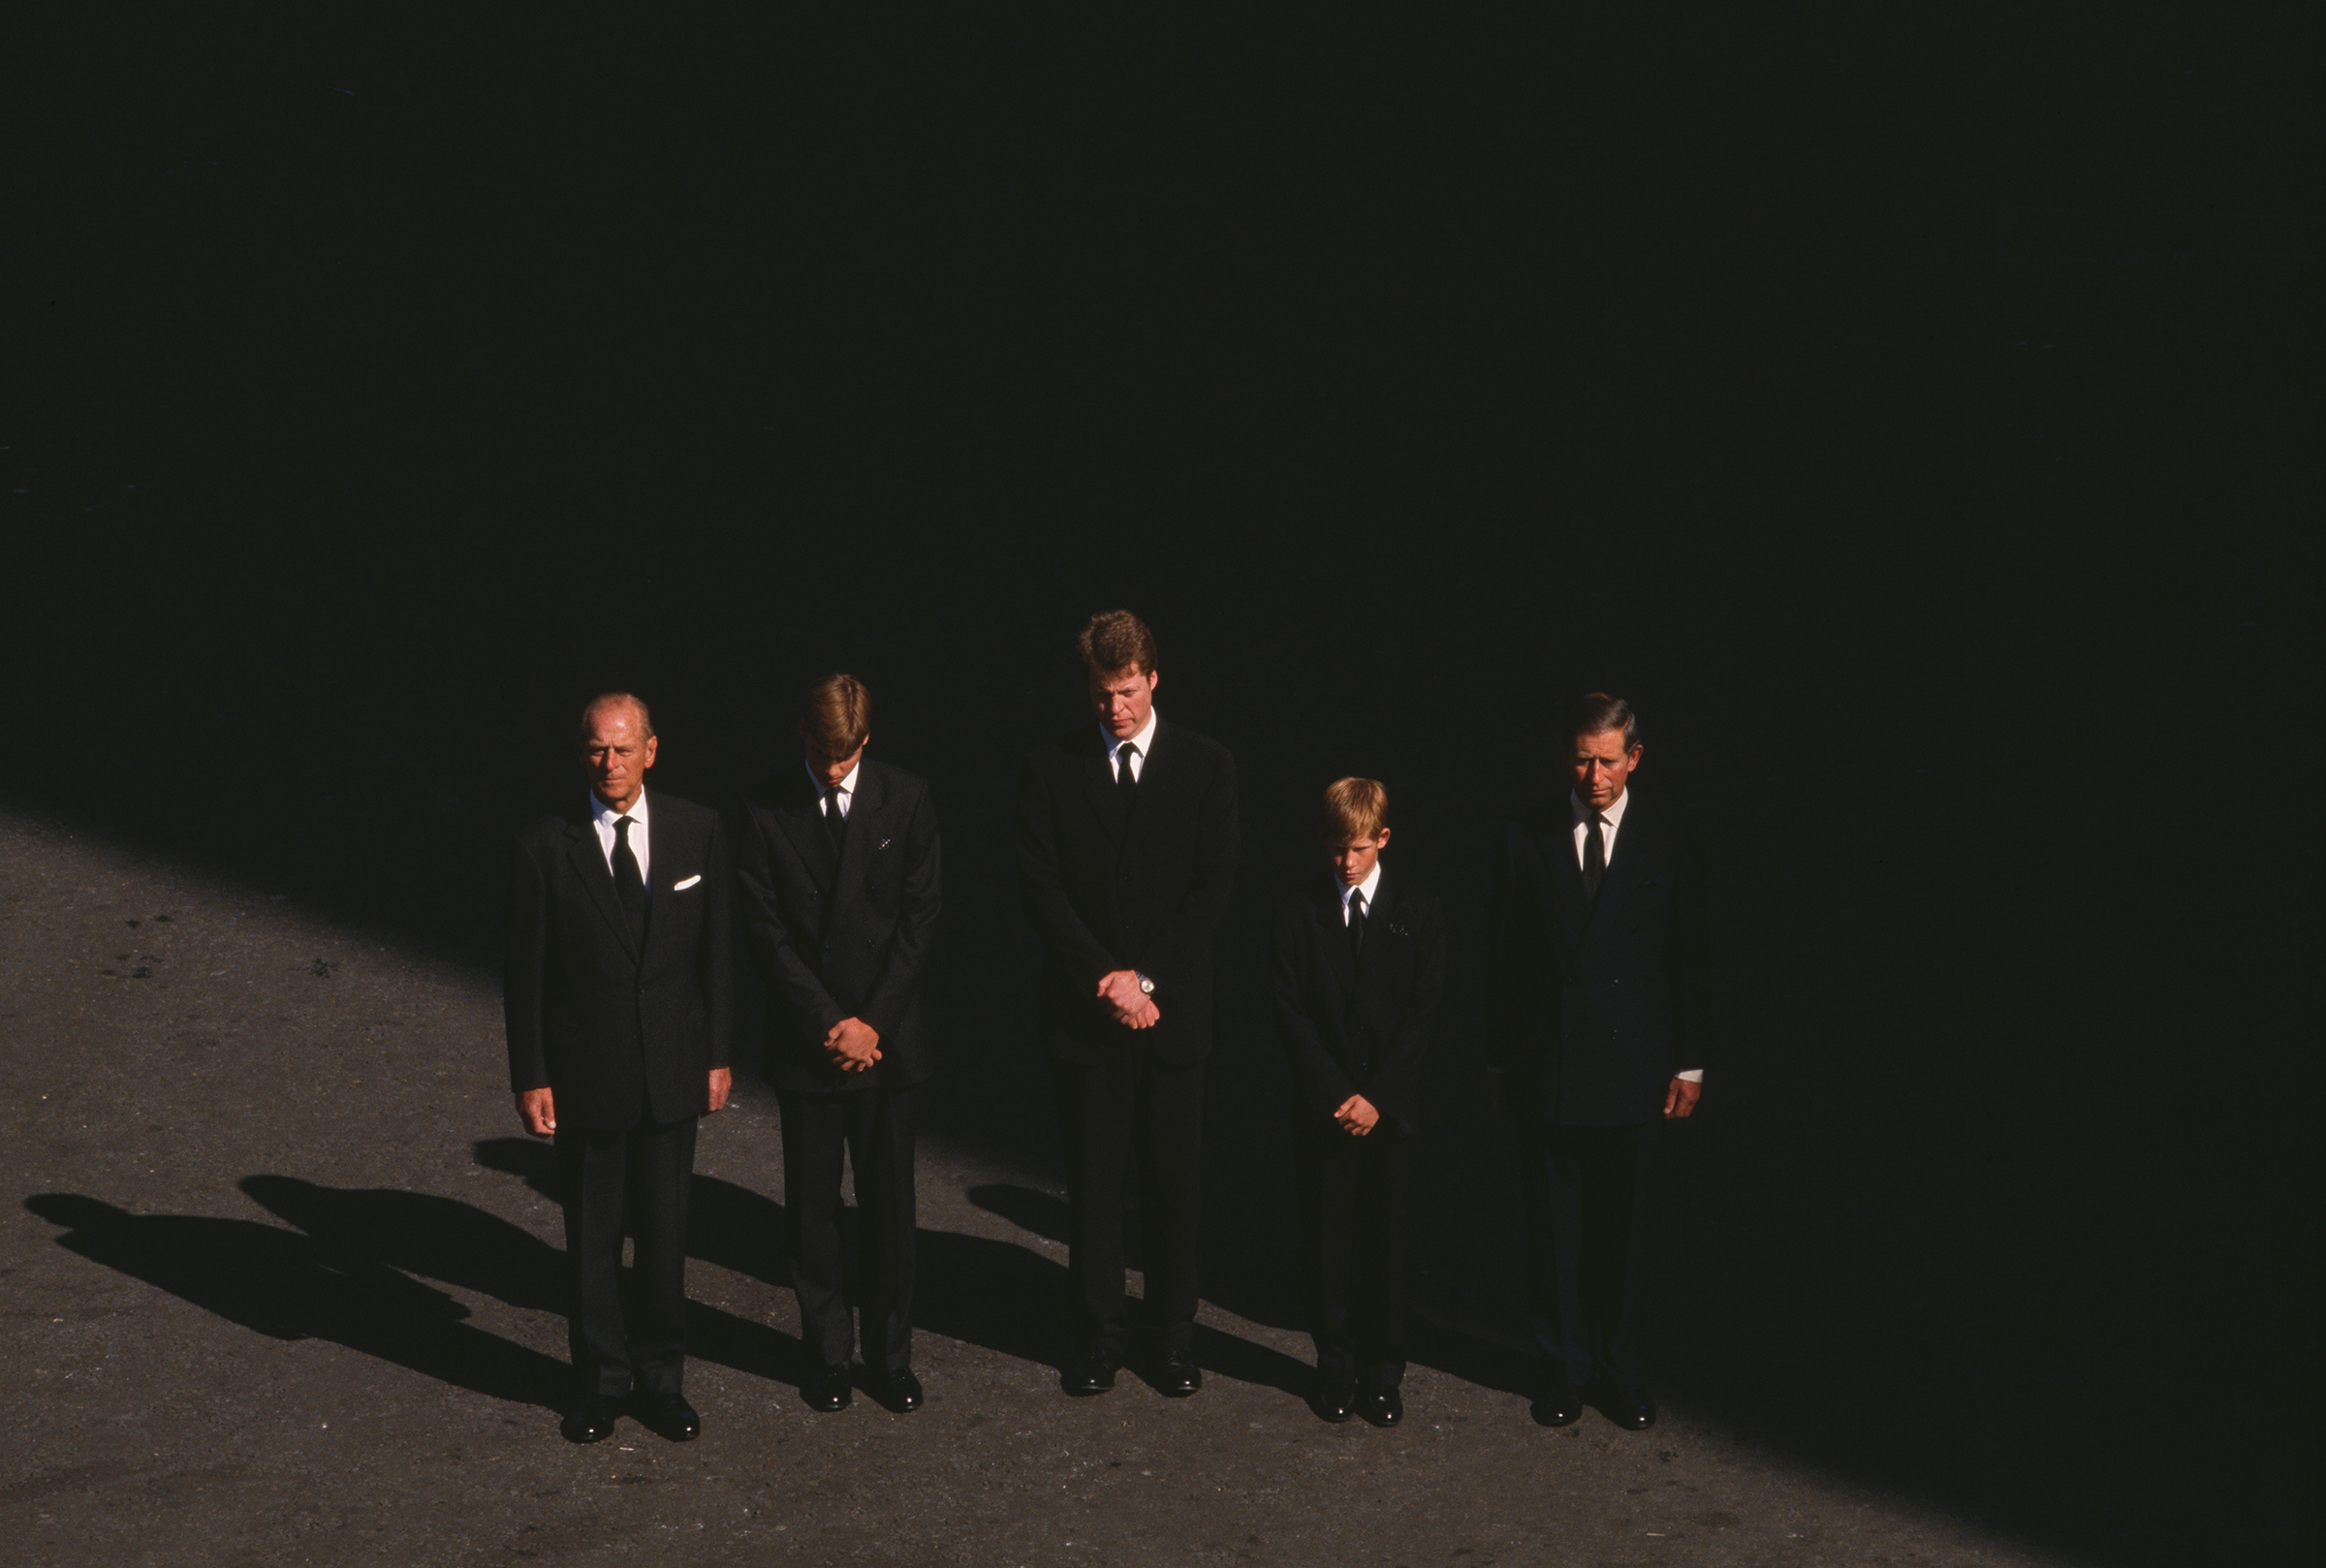 Prince Philip stands with Prince William, Earl Charles Spencer, Prince Harry and Prince Charles at the funeral of Princess Diana, on Sept. 6, 1997. (Robert Wallis—Corbis/Getty Images)